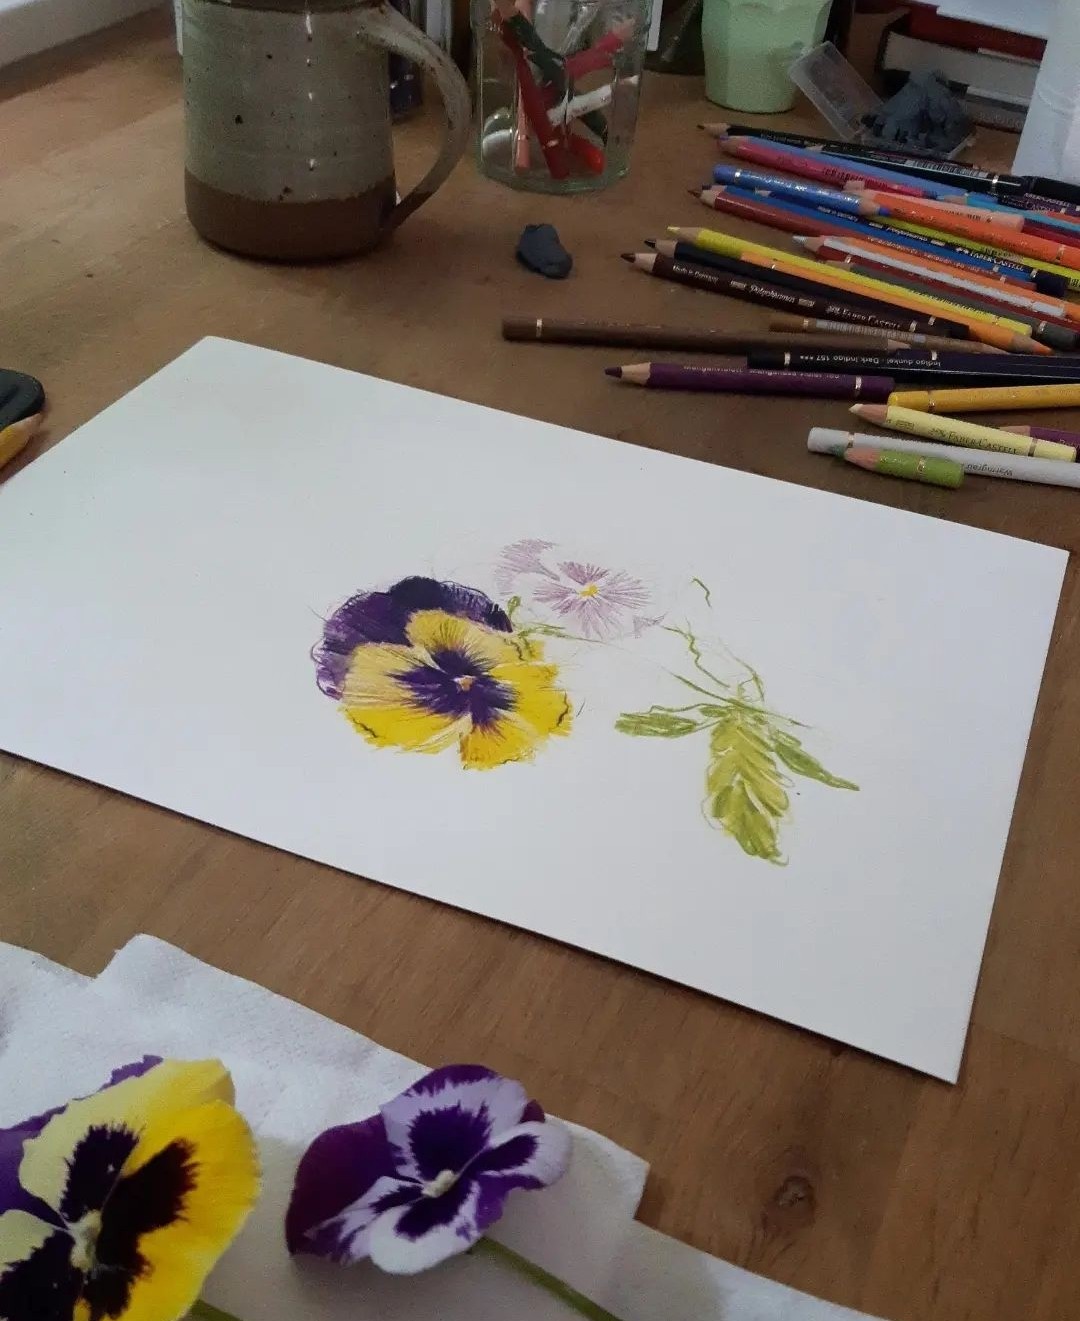 Real pansies and drawing of pansies by Claudia Lowry